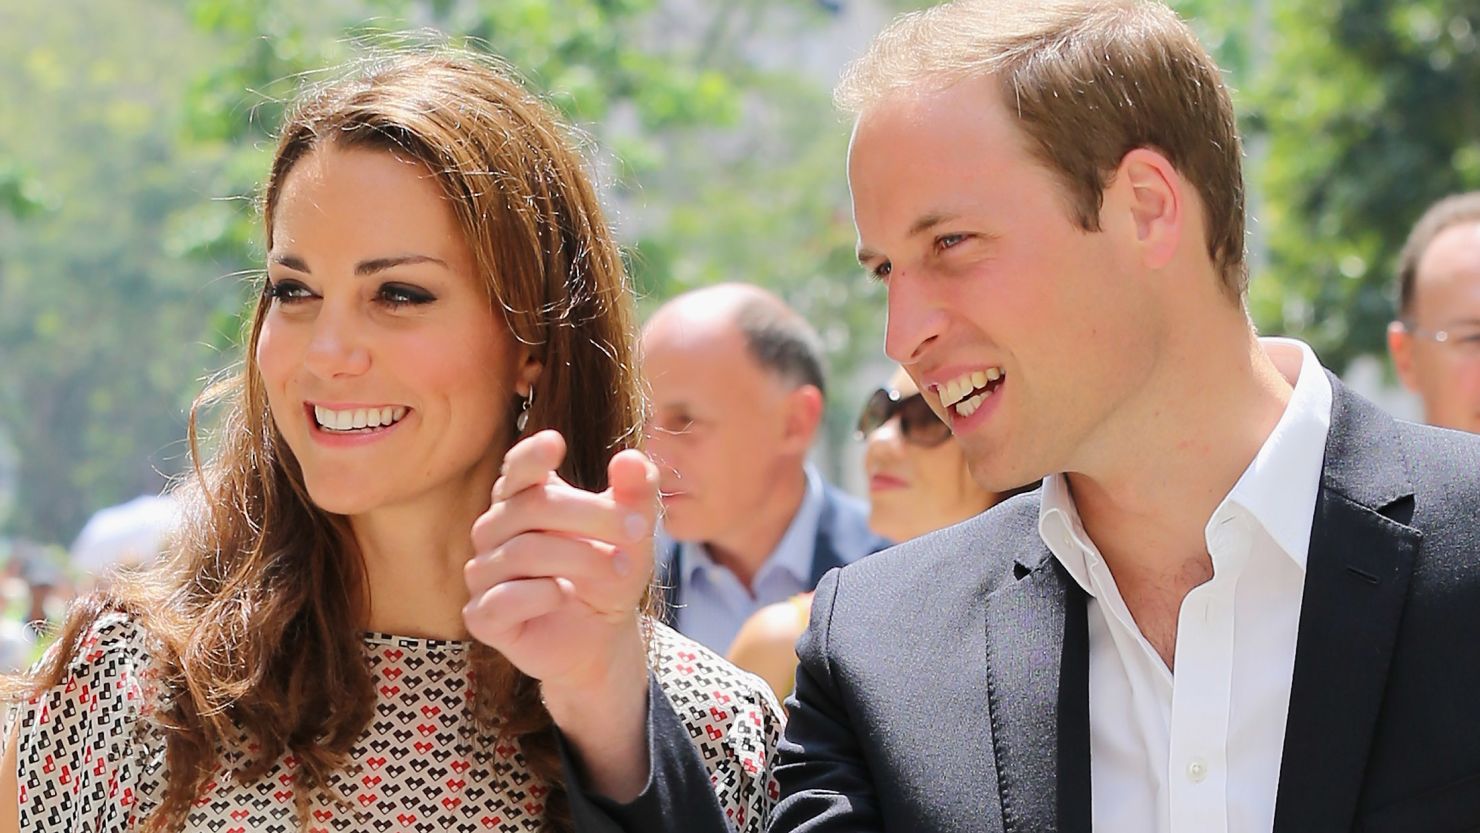  Catherine, Duchess of Cambridge and Prince William, Duke of Cambridge watch demonstrations as they attend a cultural event in Queenstown on Wednesday.